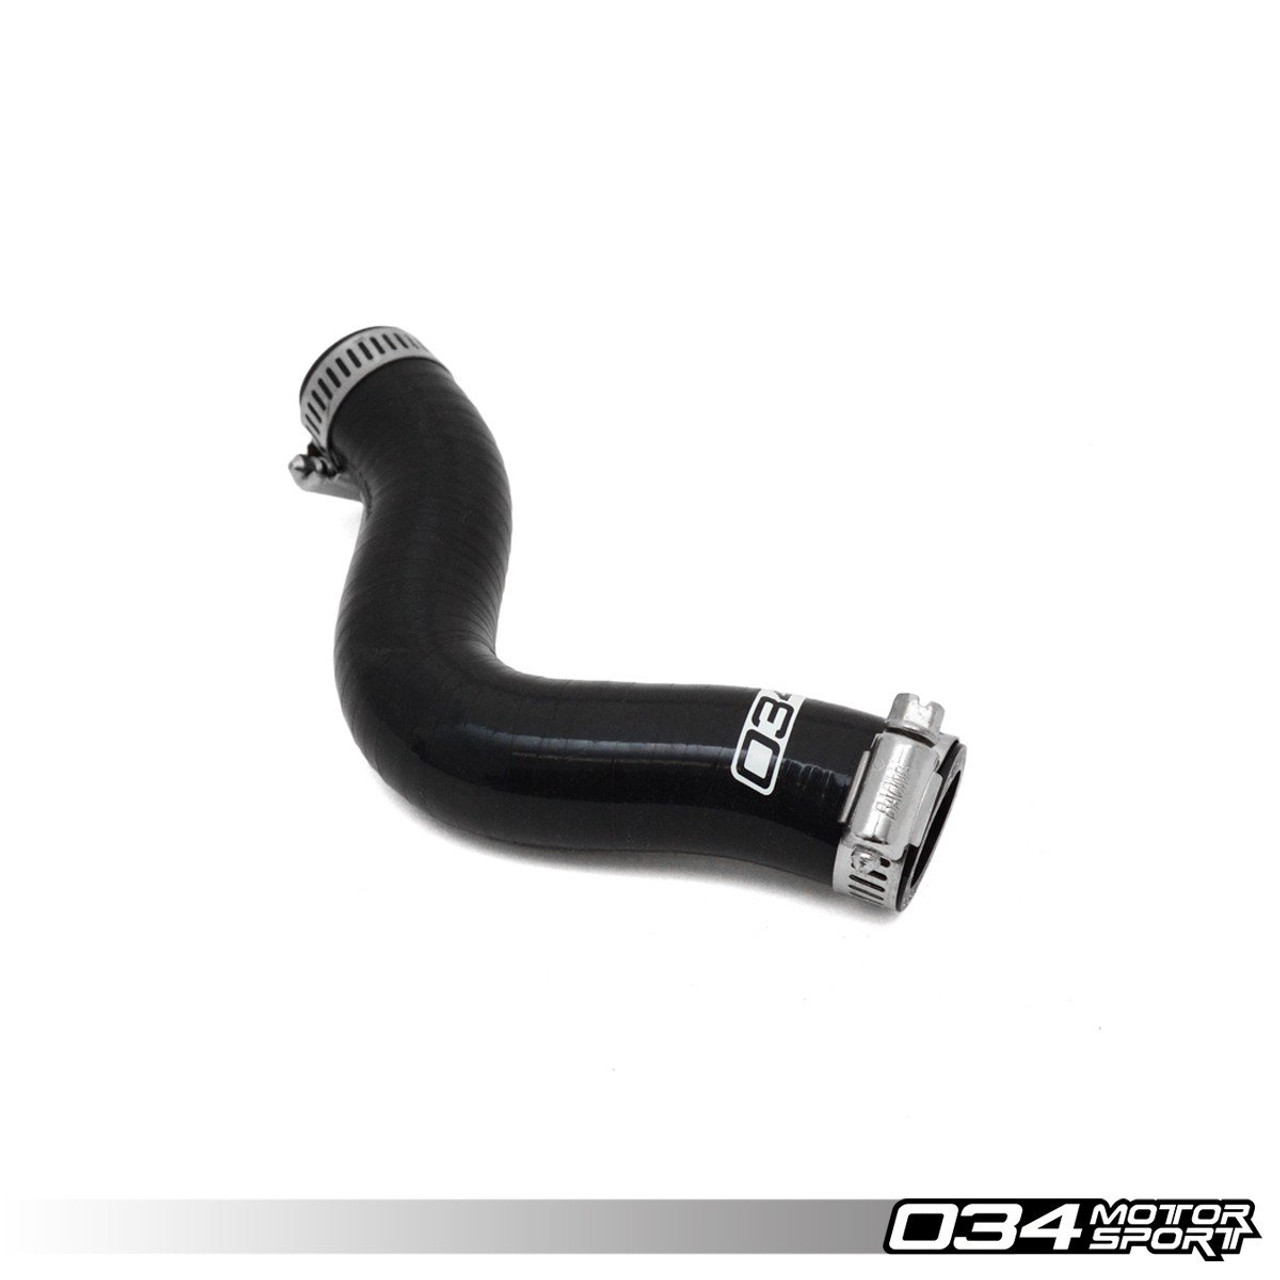 Breather Hose, MkIV Volkswagen & 8N Audi TT 1.8T, PRV Pipe to Turbo Inlet, Silicone, Replaces 06A 103 221 BR